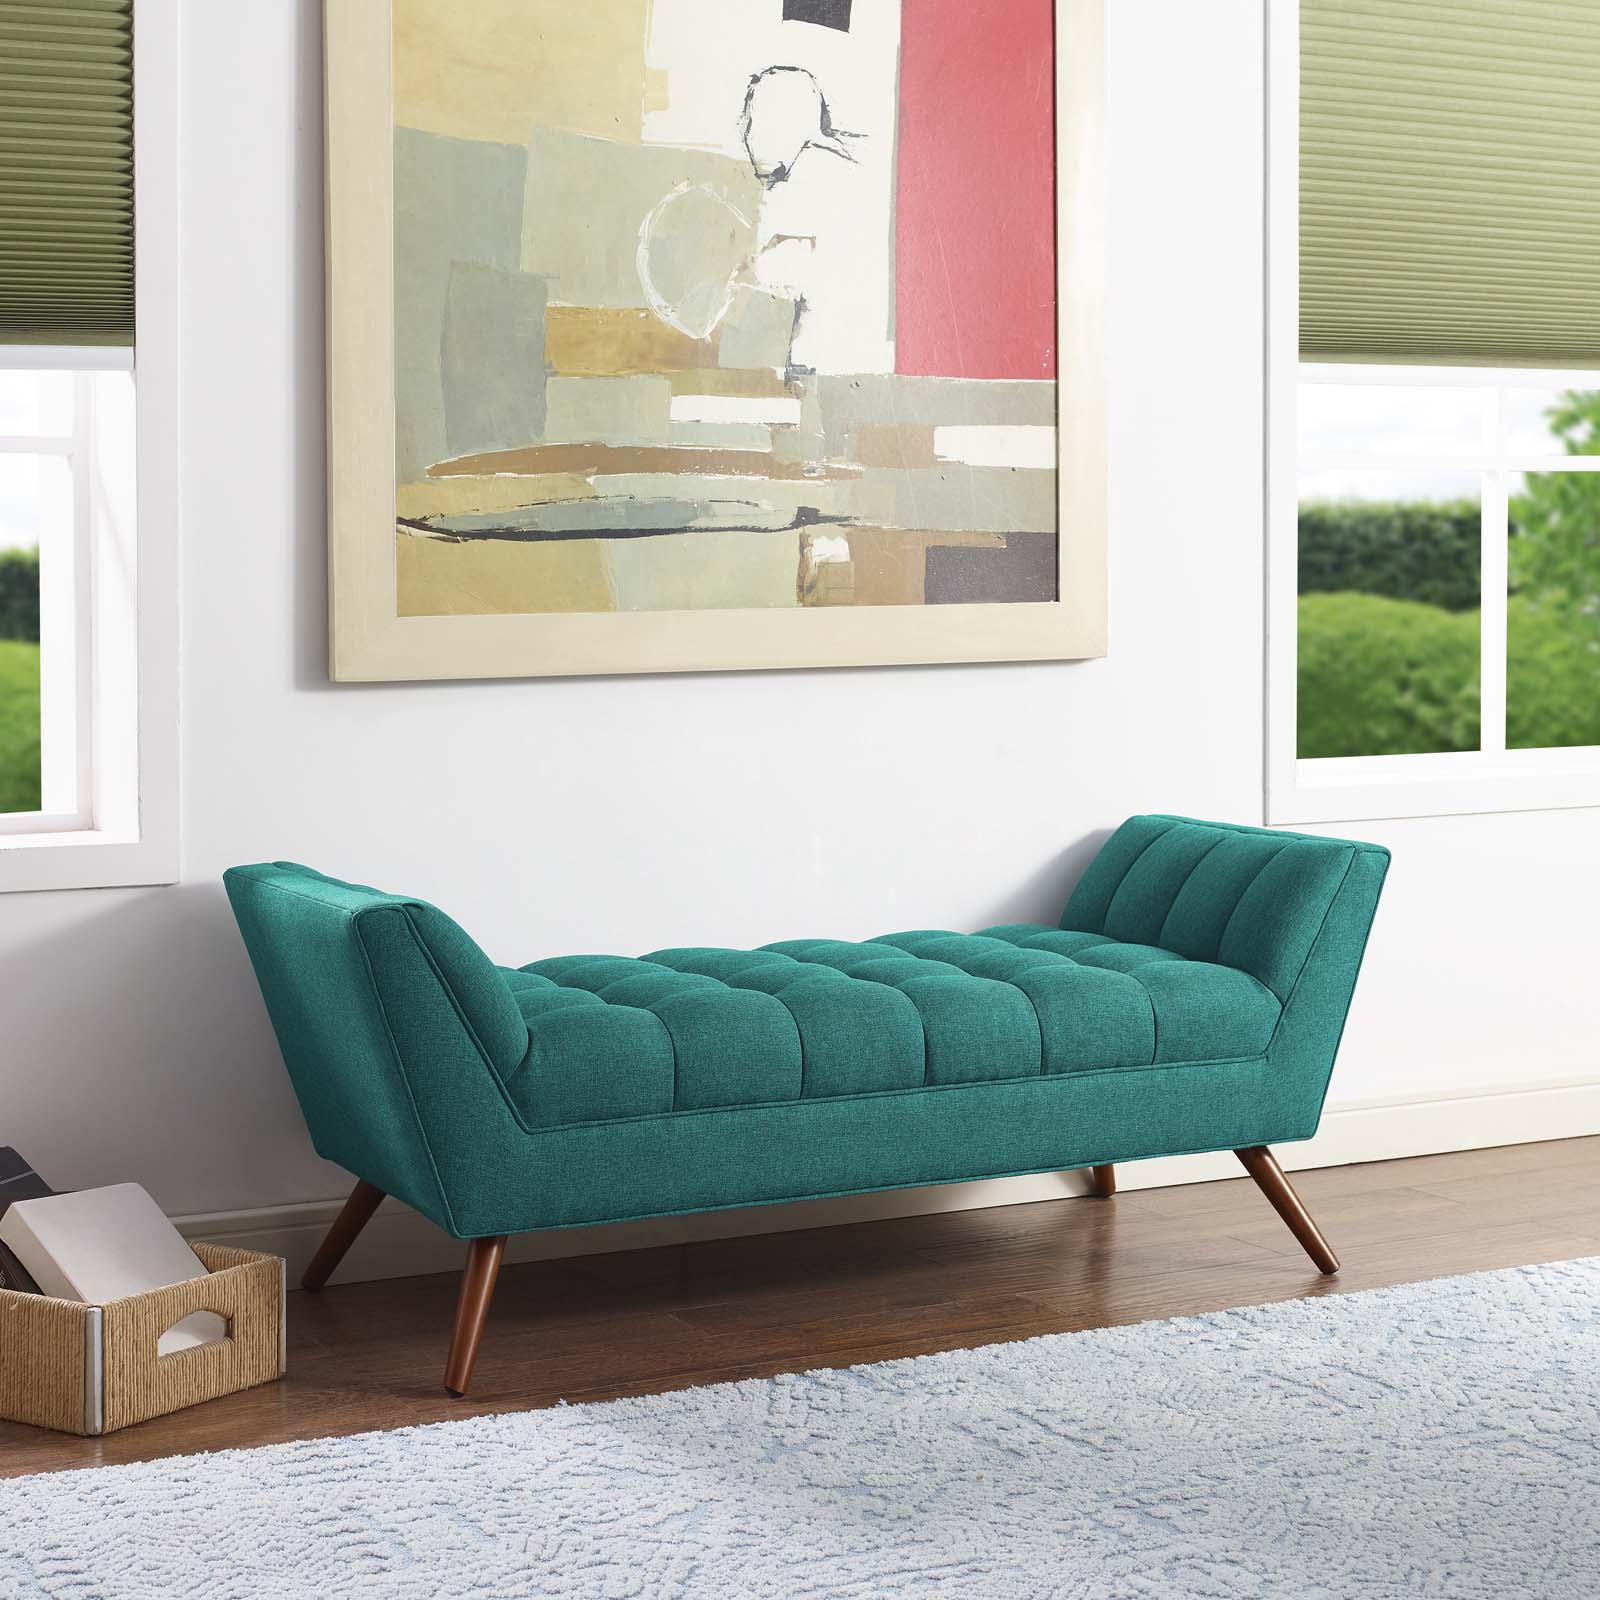 Modway Benches - Response Medium Upholstered Fabric Bench Teal